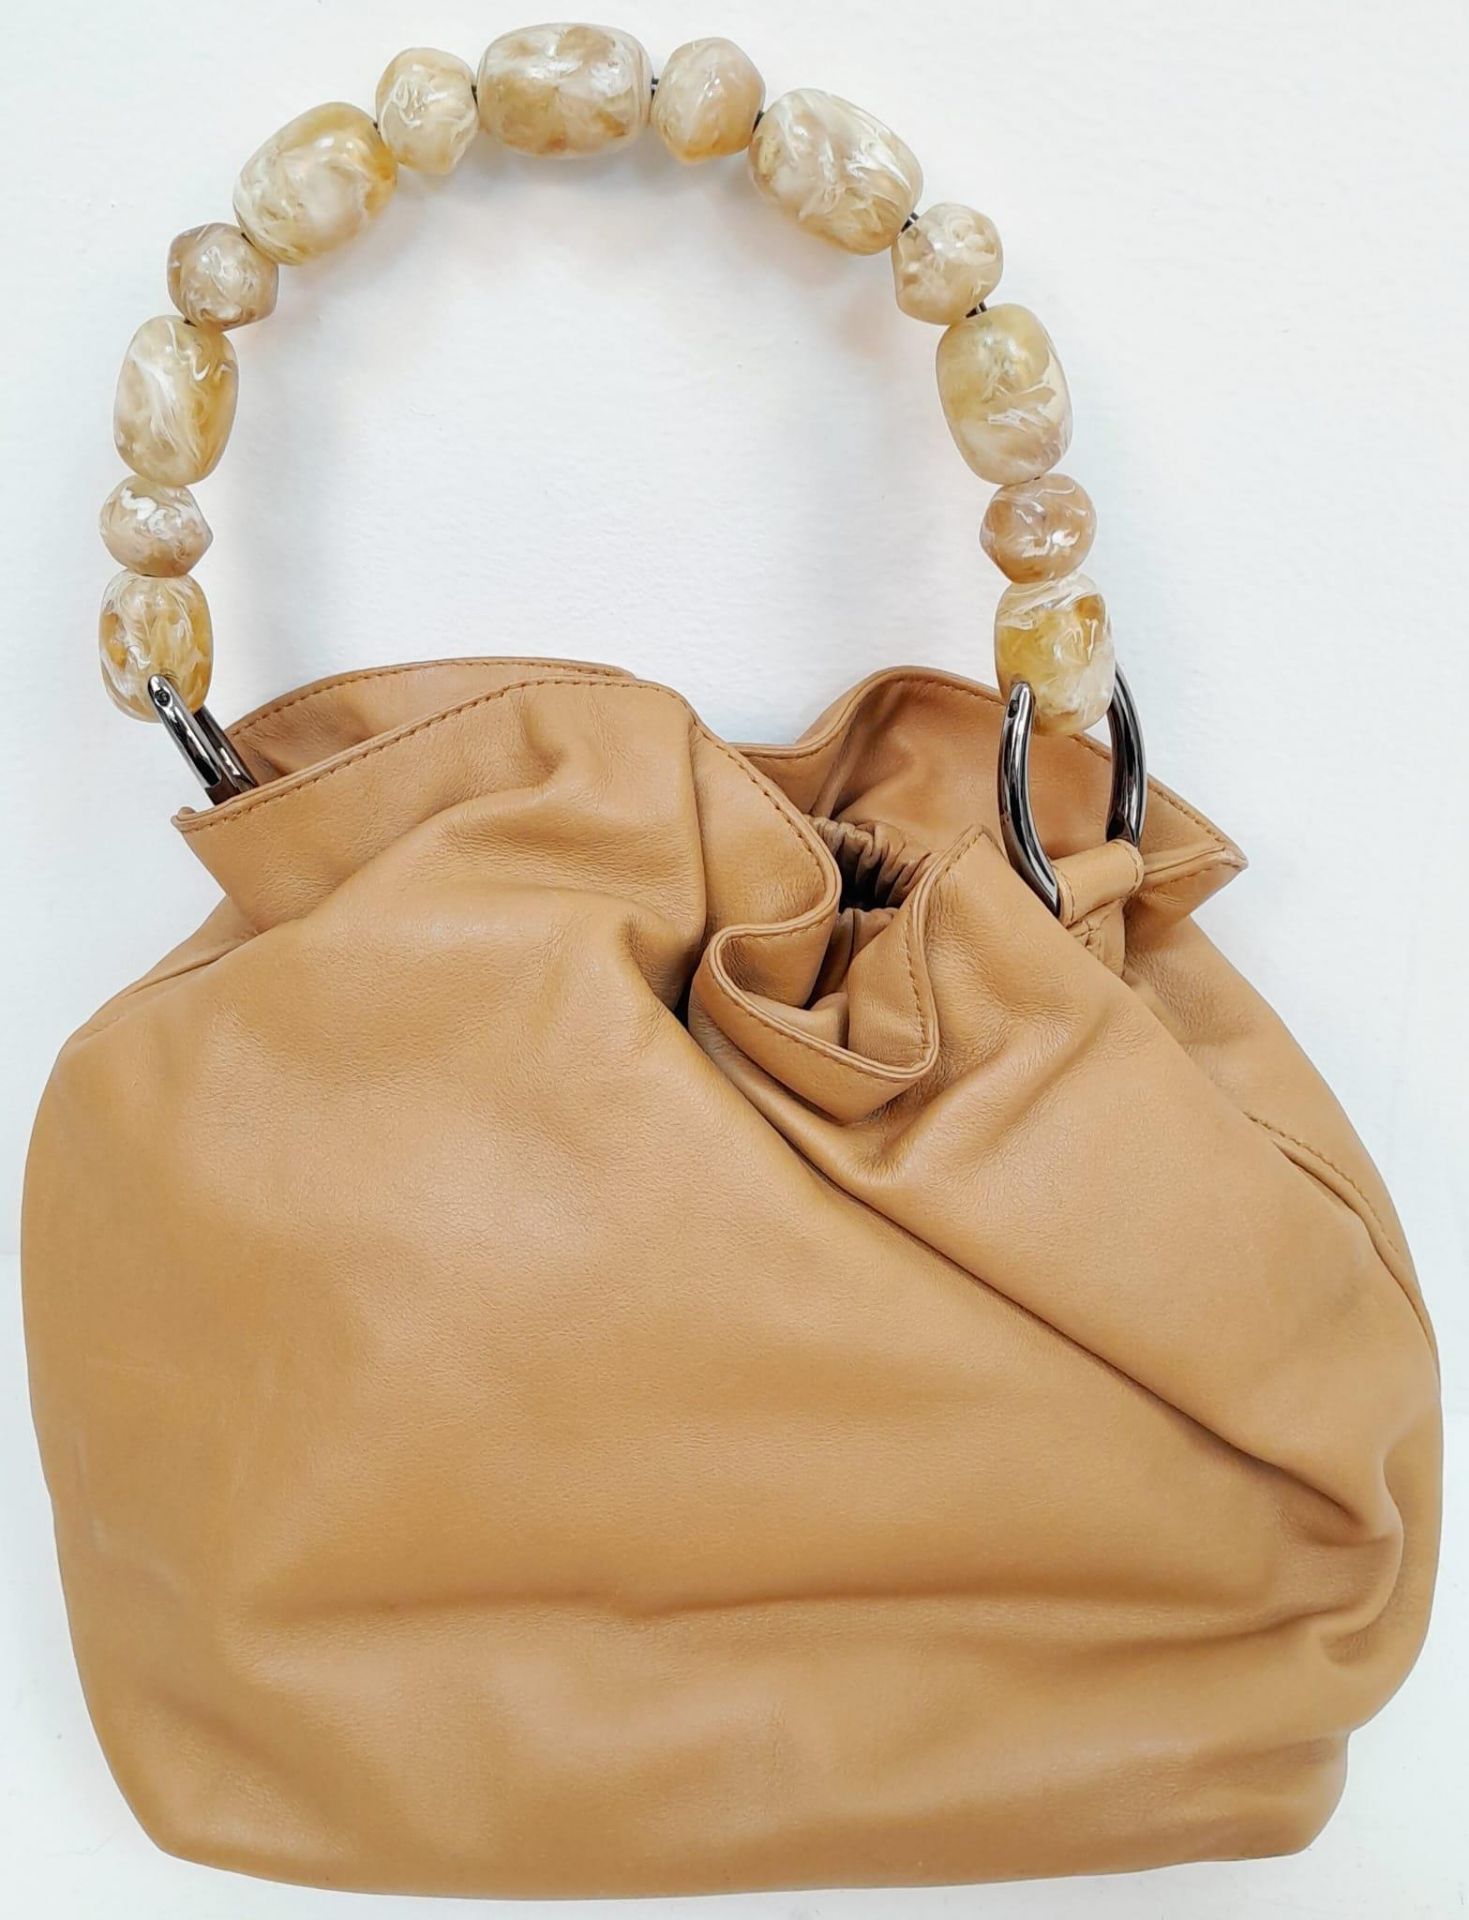 A Christian Dior Tan 'Maris' Hand Bag. Leather exterior with silver-toned hardware, beaded handle, - Bild 2 aus 6